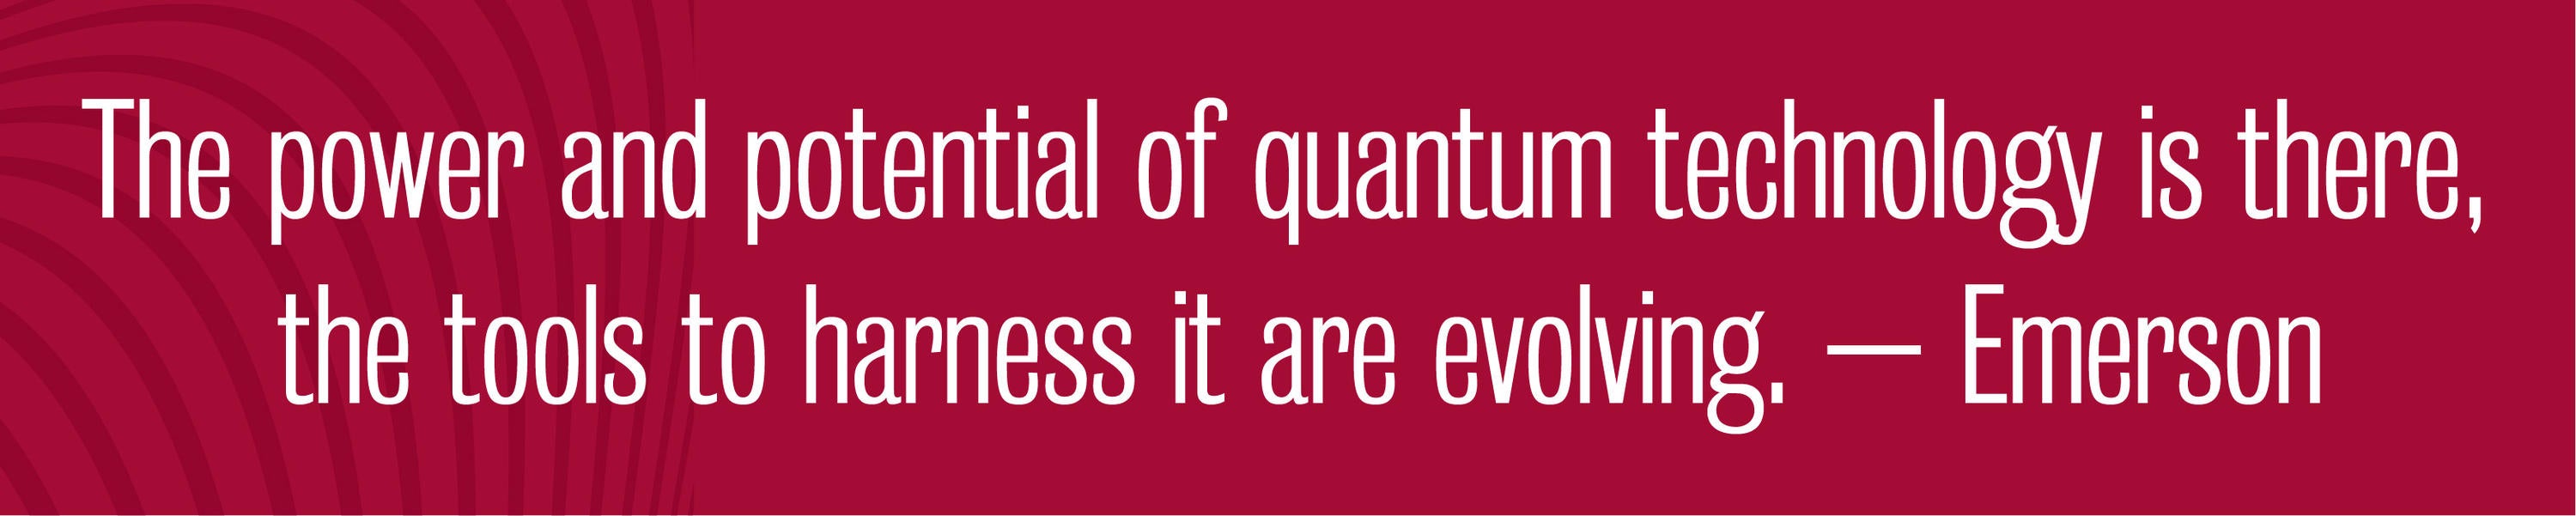 The power and potential of quantum technology is there,  the tools to harness it are evolving. – Emerson